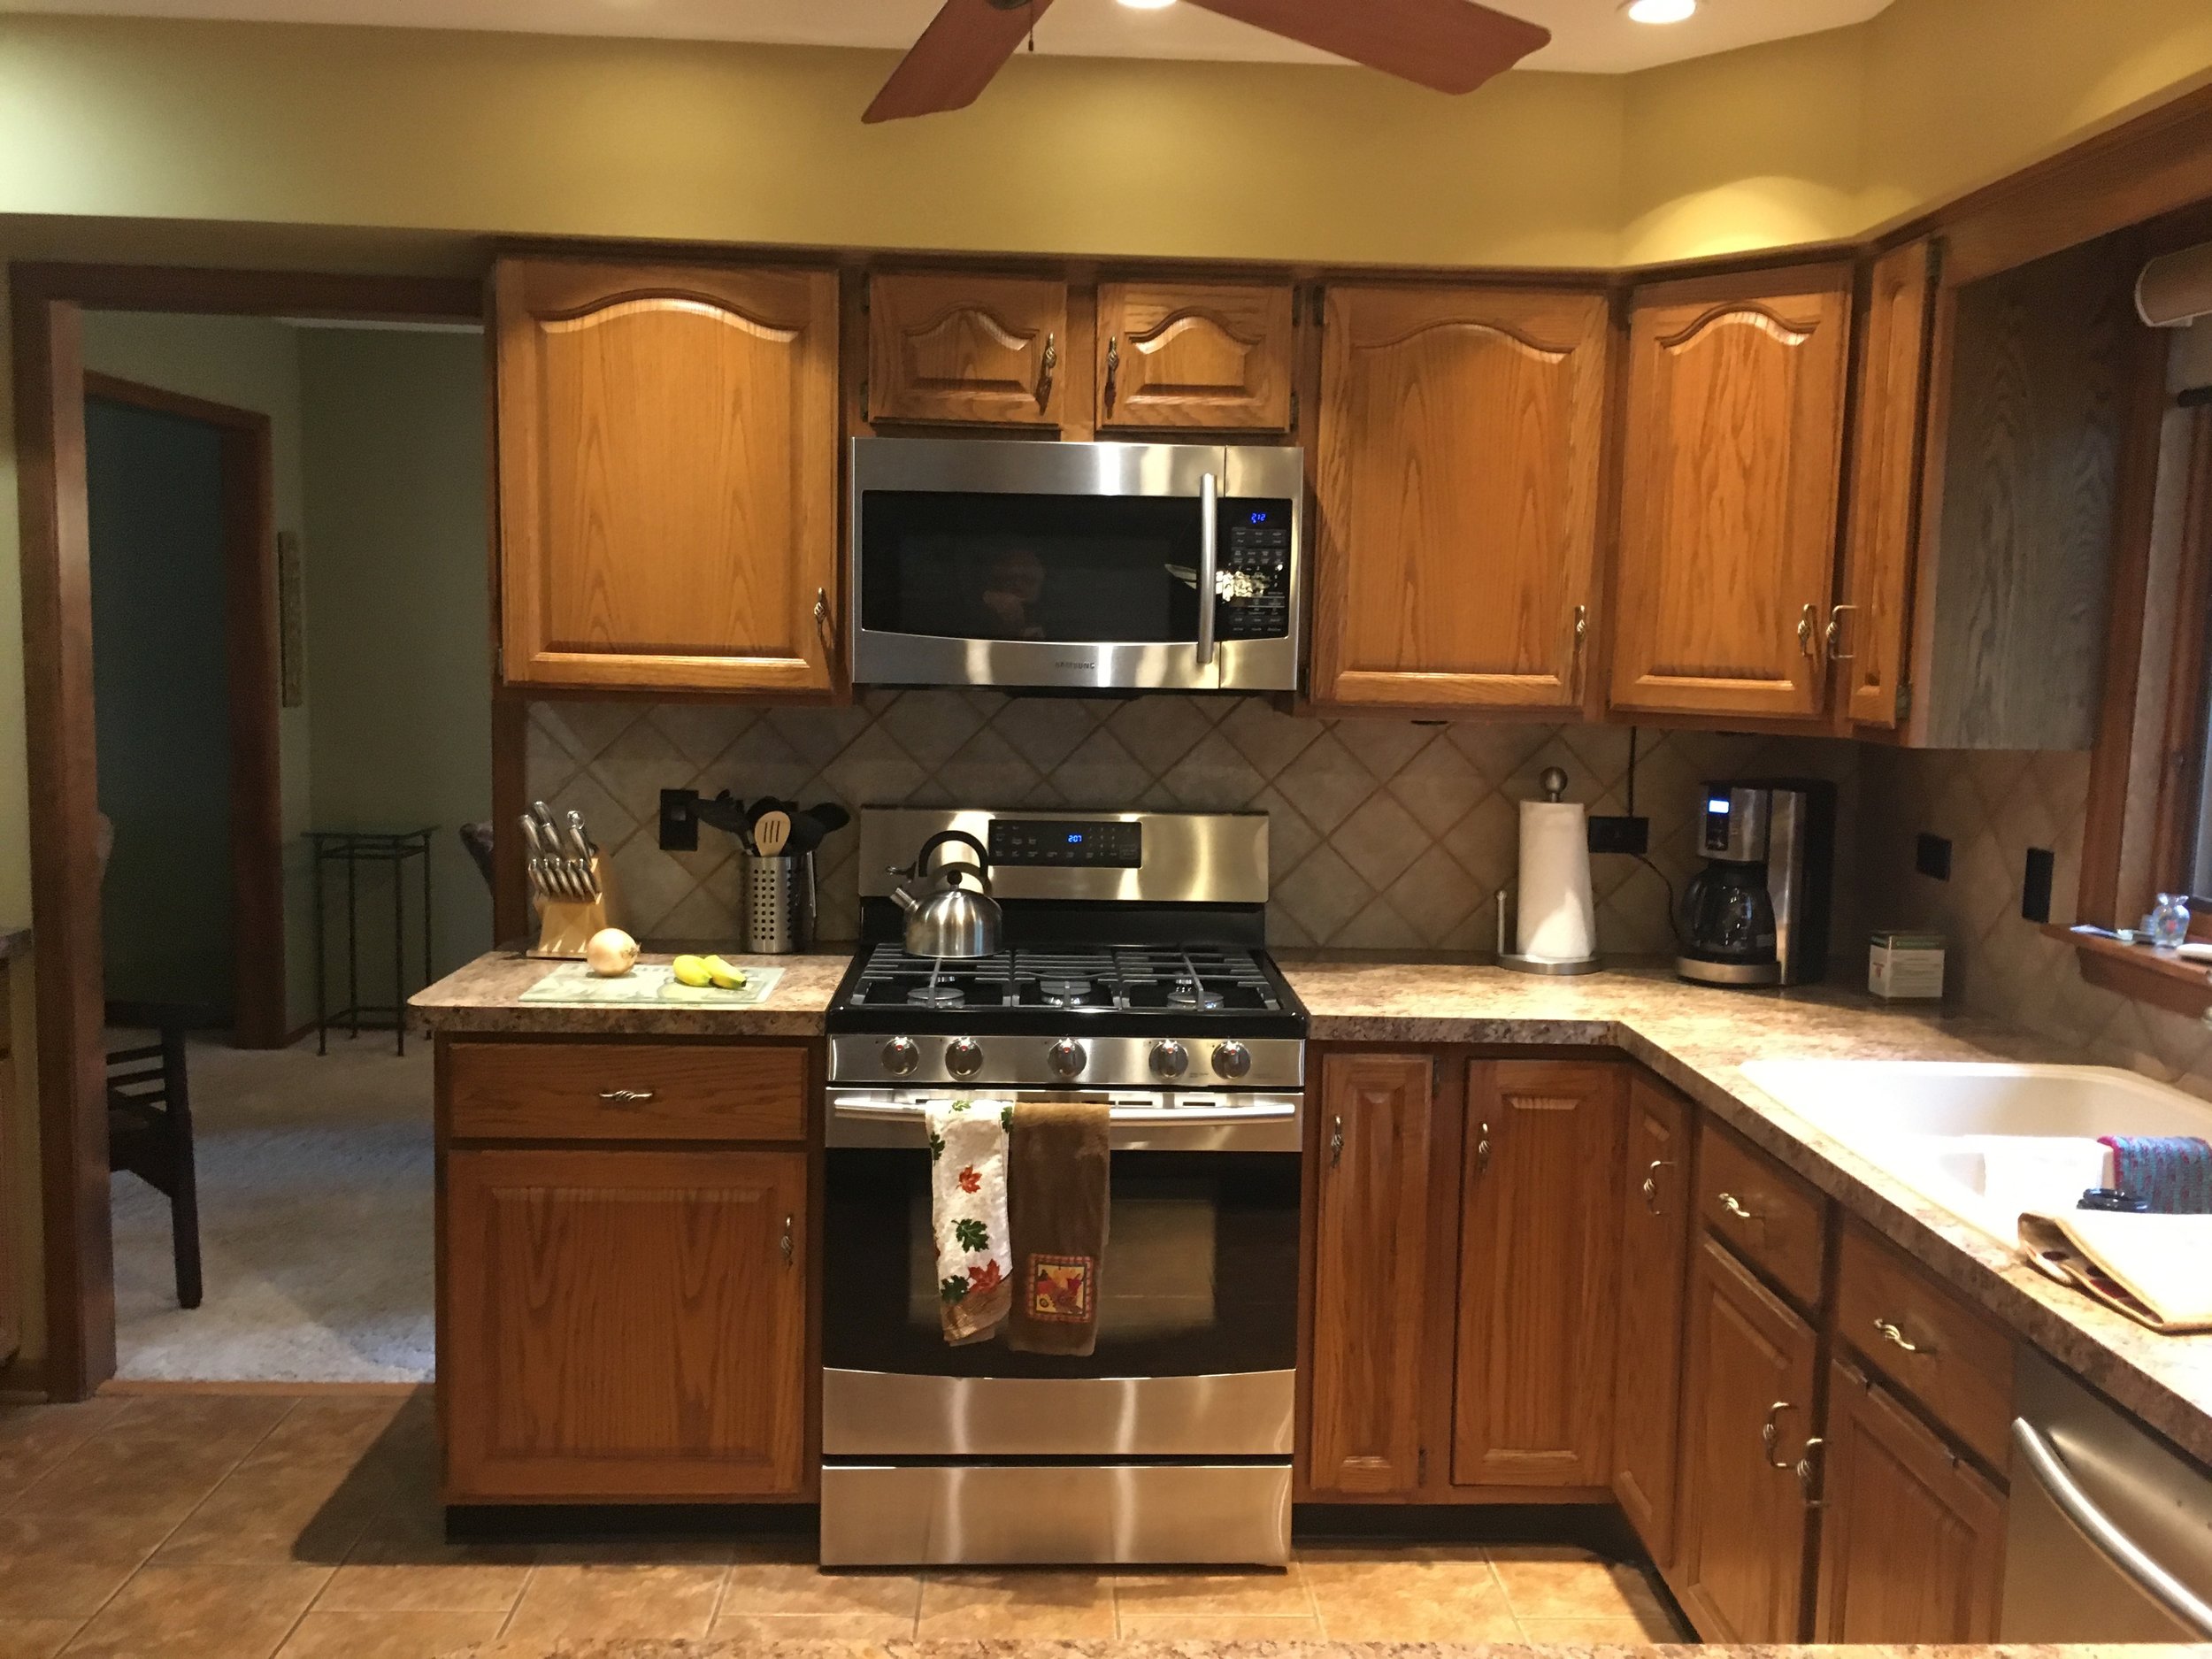 BEFORE PHOTO OF NAPERVILLE ILLINOIS KITCHEN REMODEL WITH HONEY OAK CABINETS FROM 1988